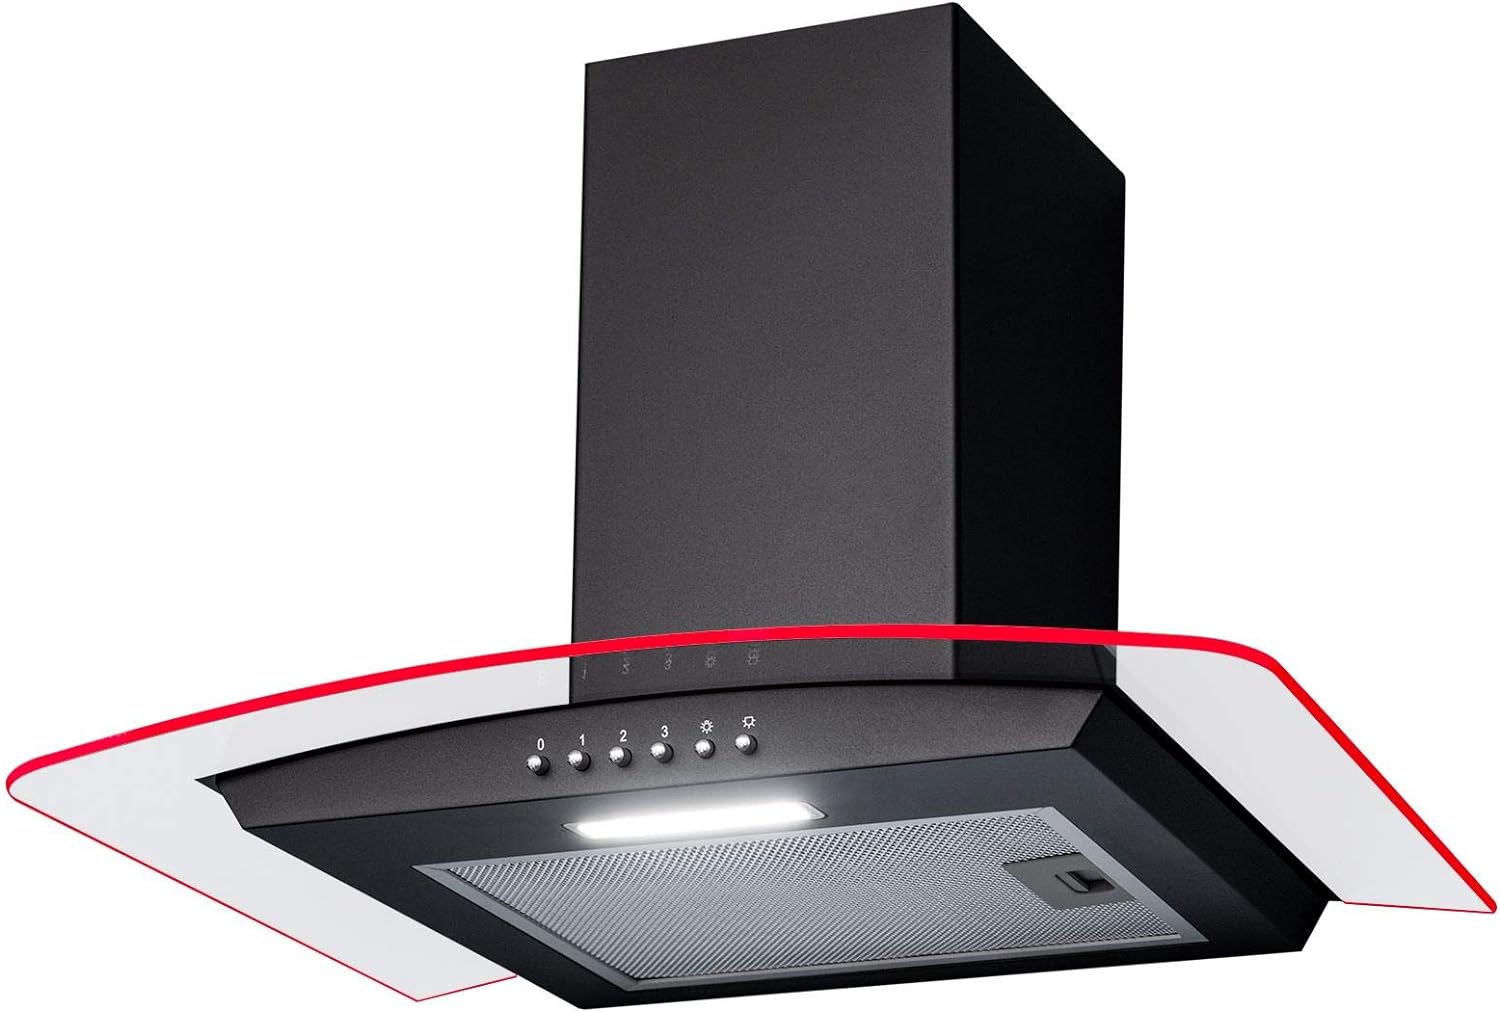 SIA CPLE60BL 60cm Black 3 Colour LED Edge Lit Curved Glass Cooker Hood Extractor - Amazing Gadgets Outlet